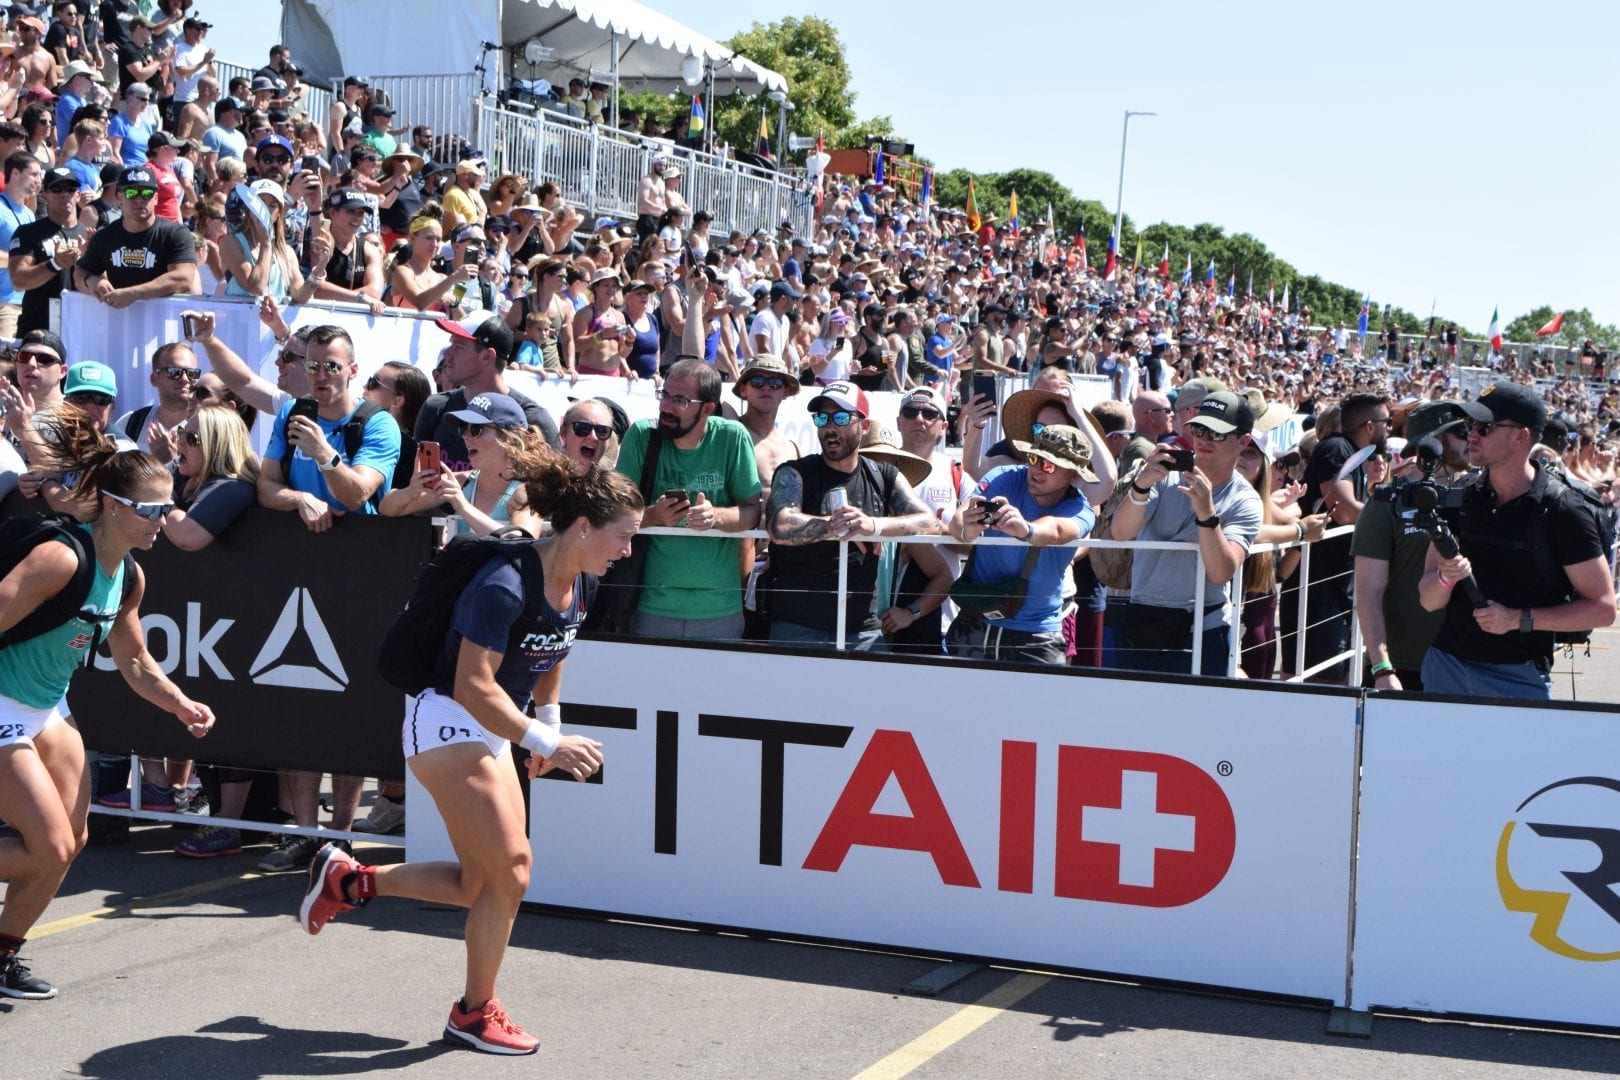 Tia-Clair Toomey completes the Ruck Run event at the 2019 CrossFit Games